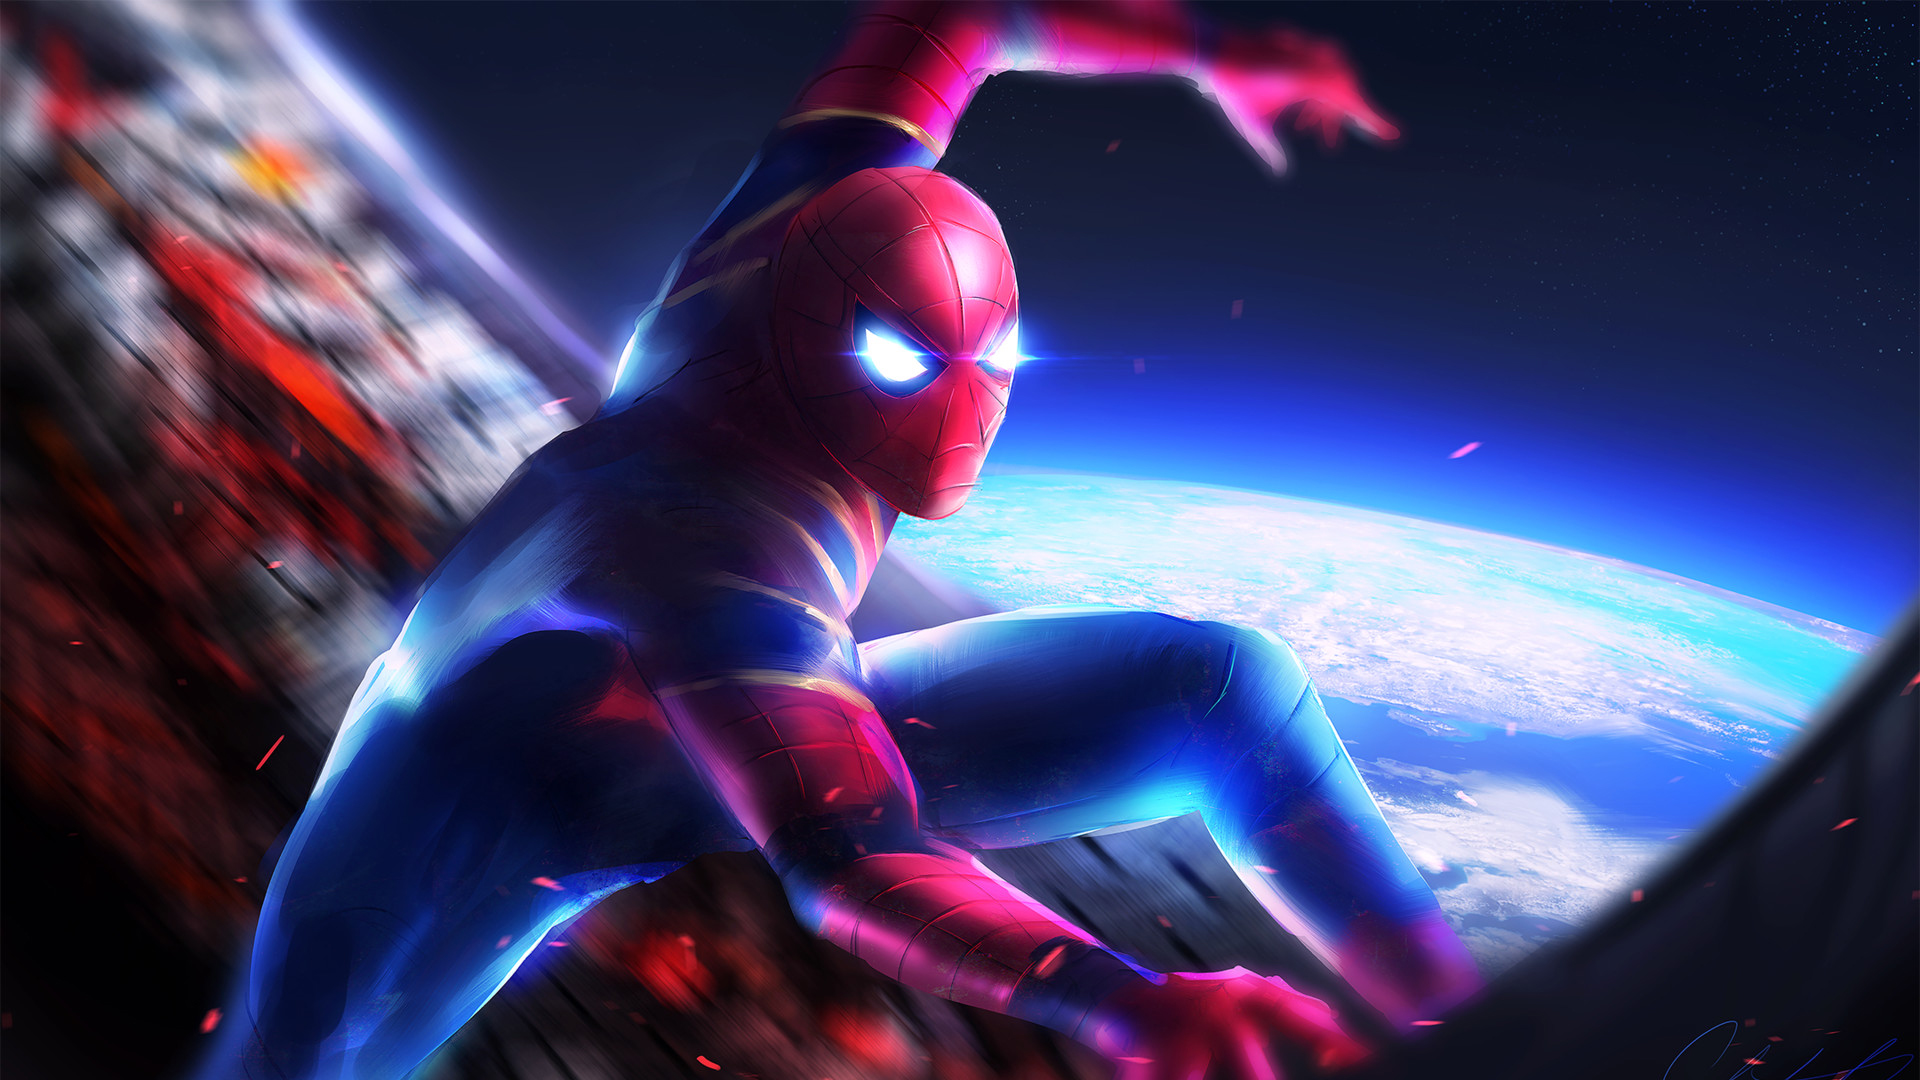 Free Download Spider Man In Avengers Infinity War Wallpapers Hd Wallpapers 19x1080 For Your Desktop Mobile Tablet Explore 15 Infinity War Spider Man Hd Wallpapers Infinity War Spider Man Hd Wallpapers